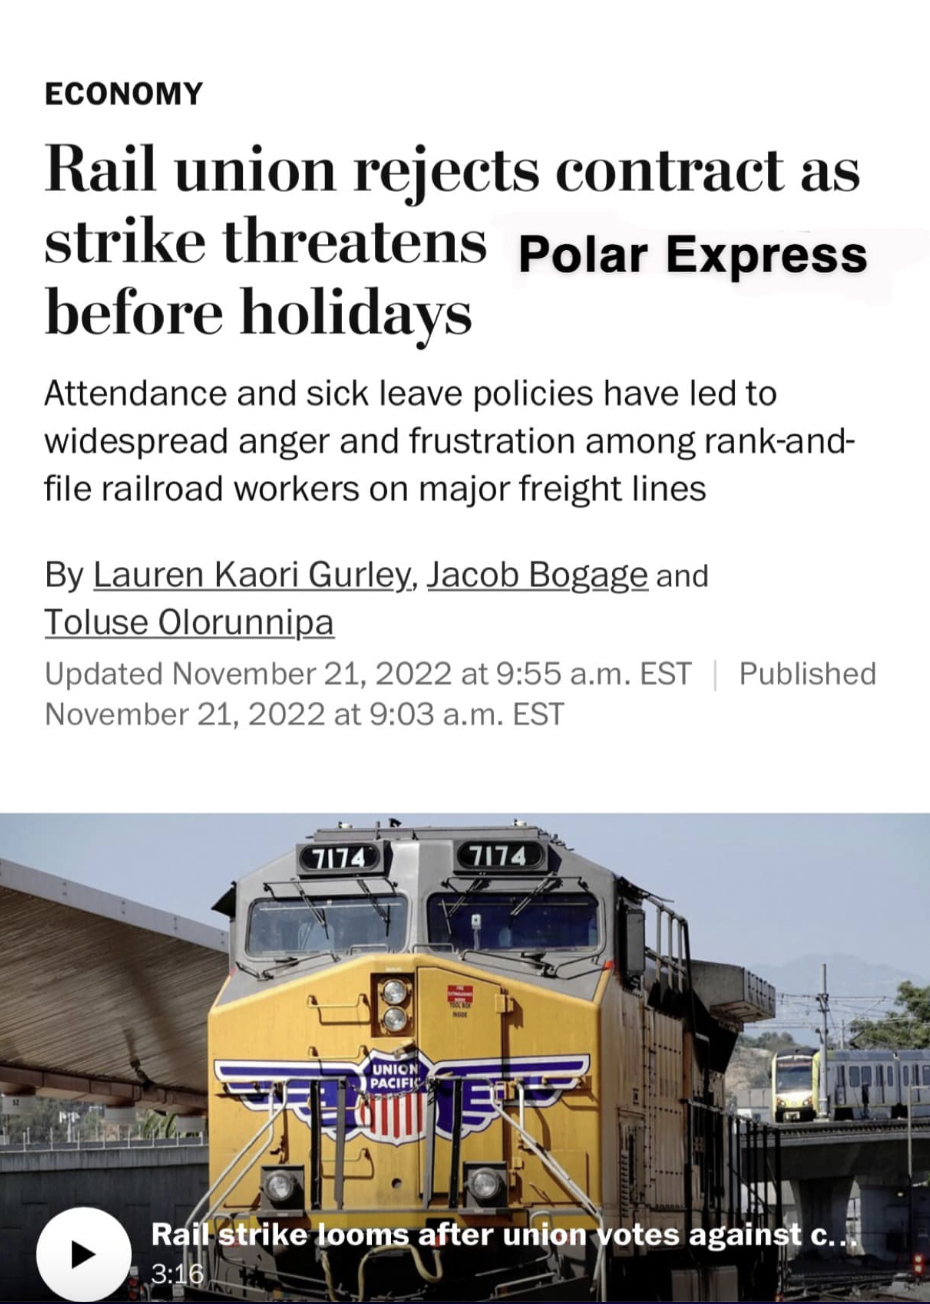 vehicle - Economy Rail union rejects contract as strike threatens Polar Express before holidays Attendance and sick leave policies have led to widespread anger and frustration among rankand file railroad workers on major freight lines By Lauren Kaori Gurl